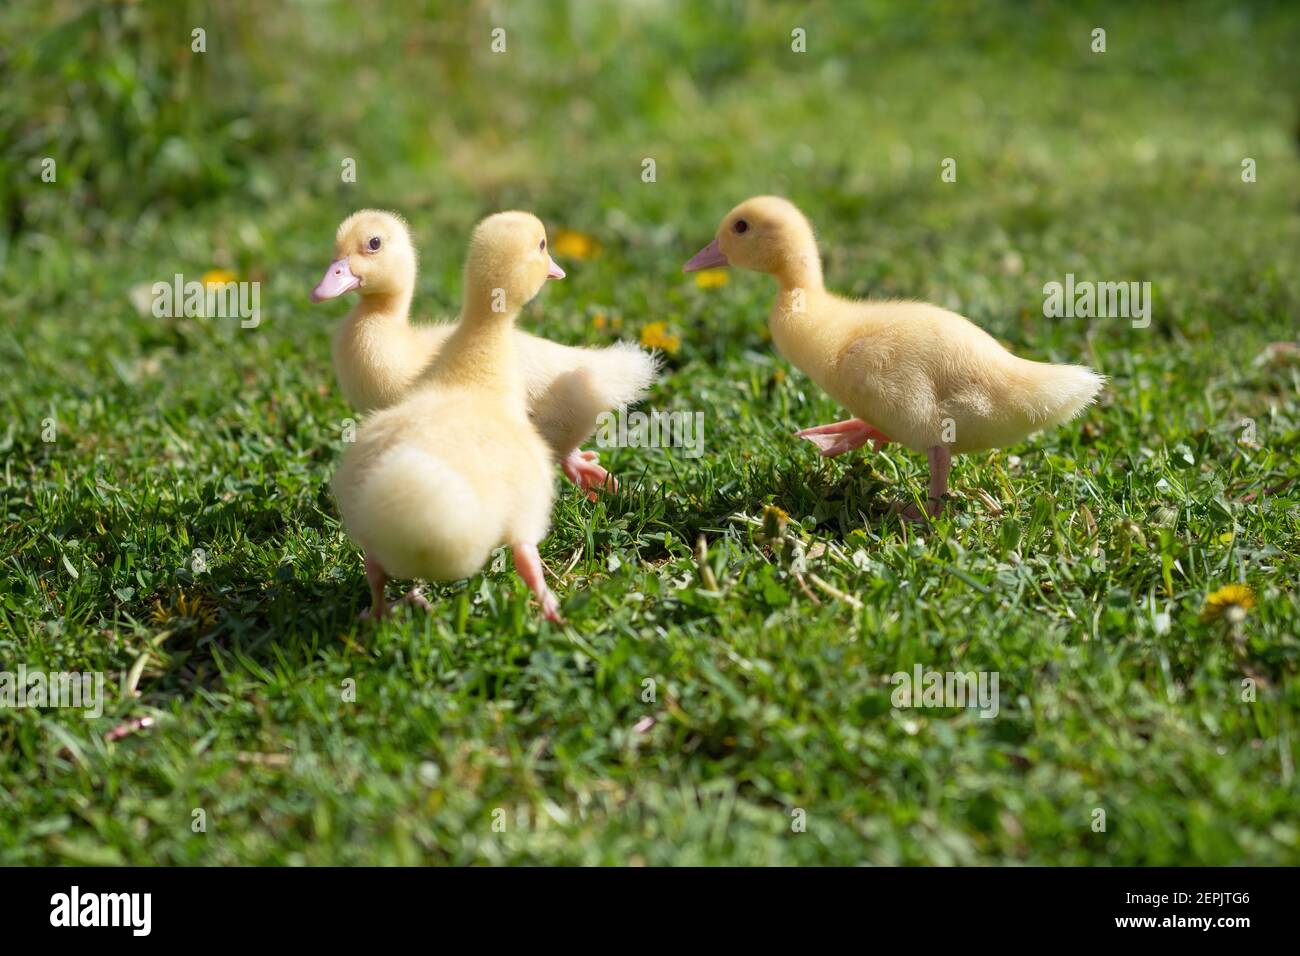 Three small fluffy ducklings outdoor. Yellow baby duck birds on spring green grass discovers life. Organic farming, animal rights, back to nature conc Stock Photo